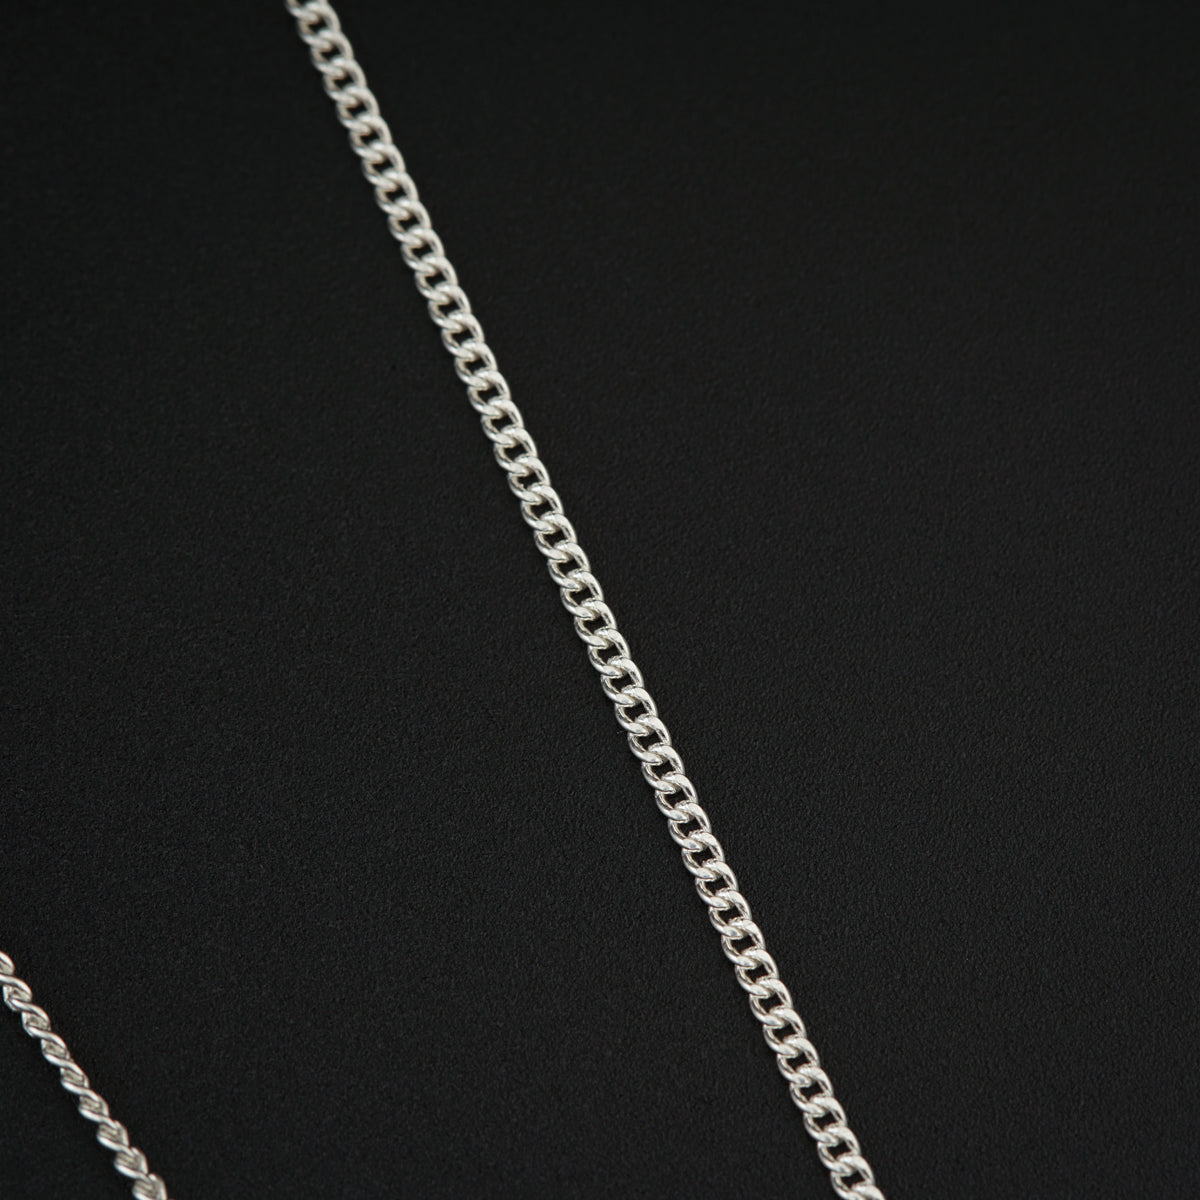 a silver chain is shown on a black surface